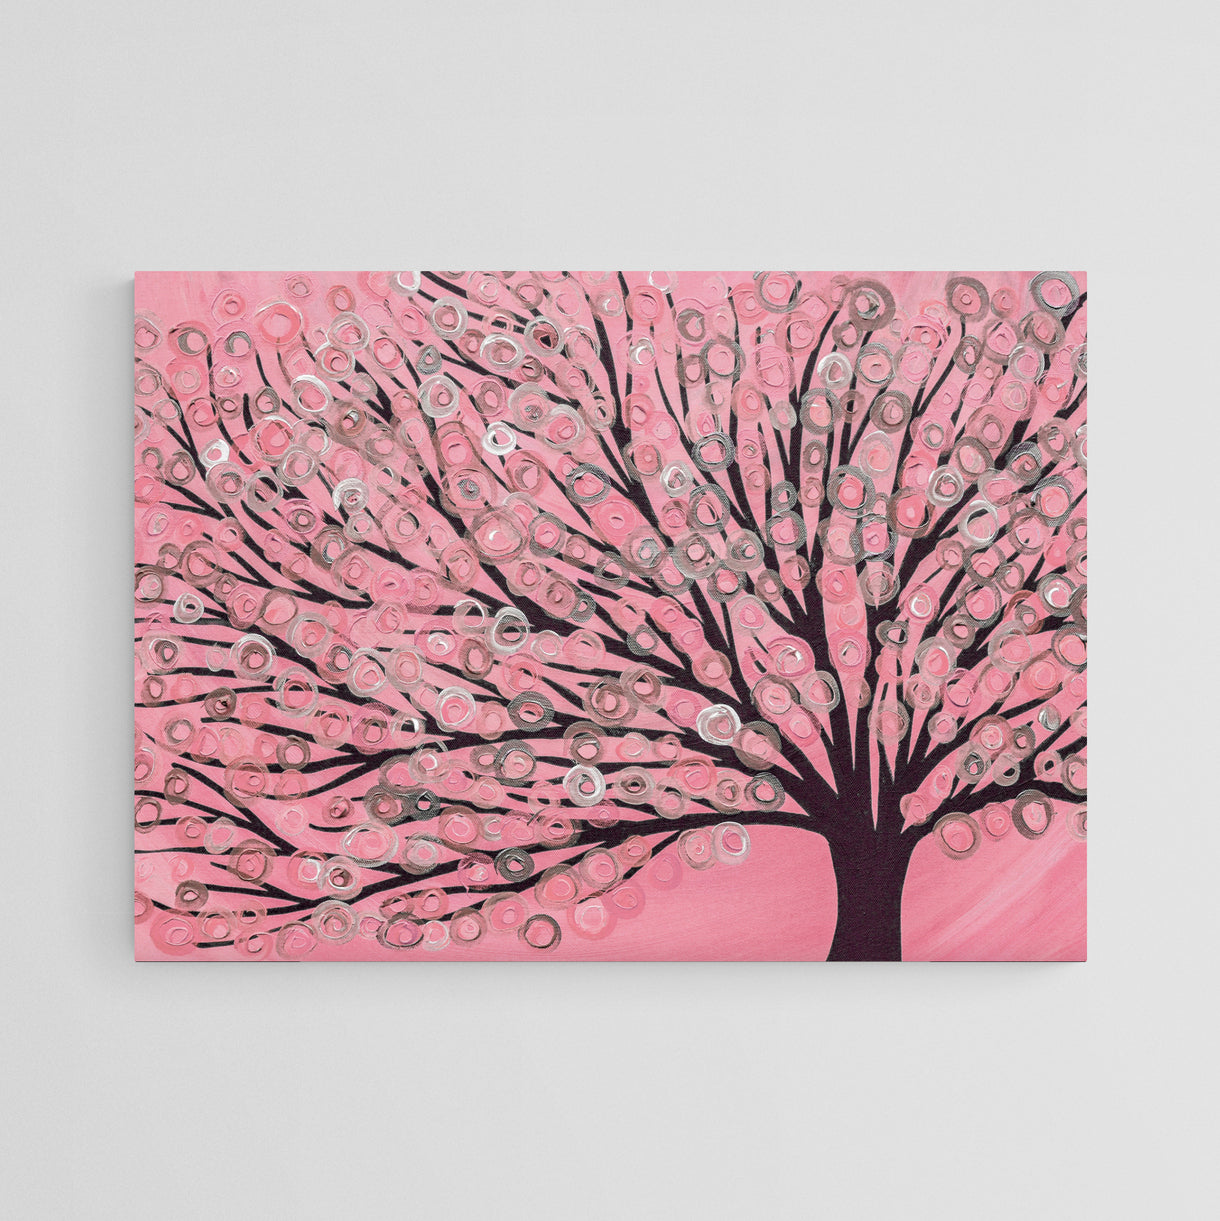 Pastel Pink & Grey Tree Canvas Print of a Painting on a Plain Wall